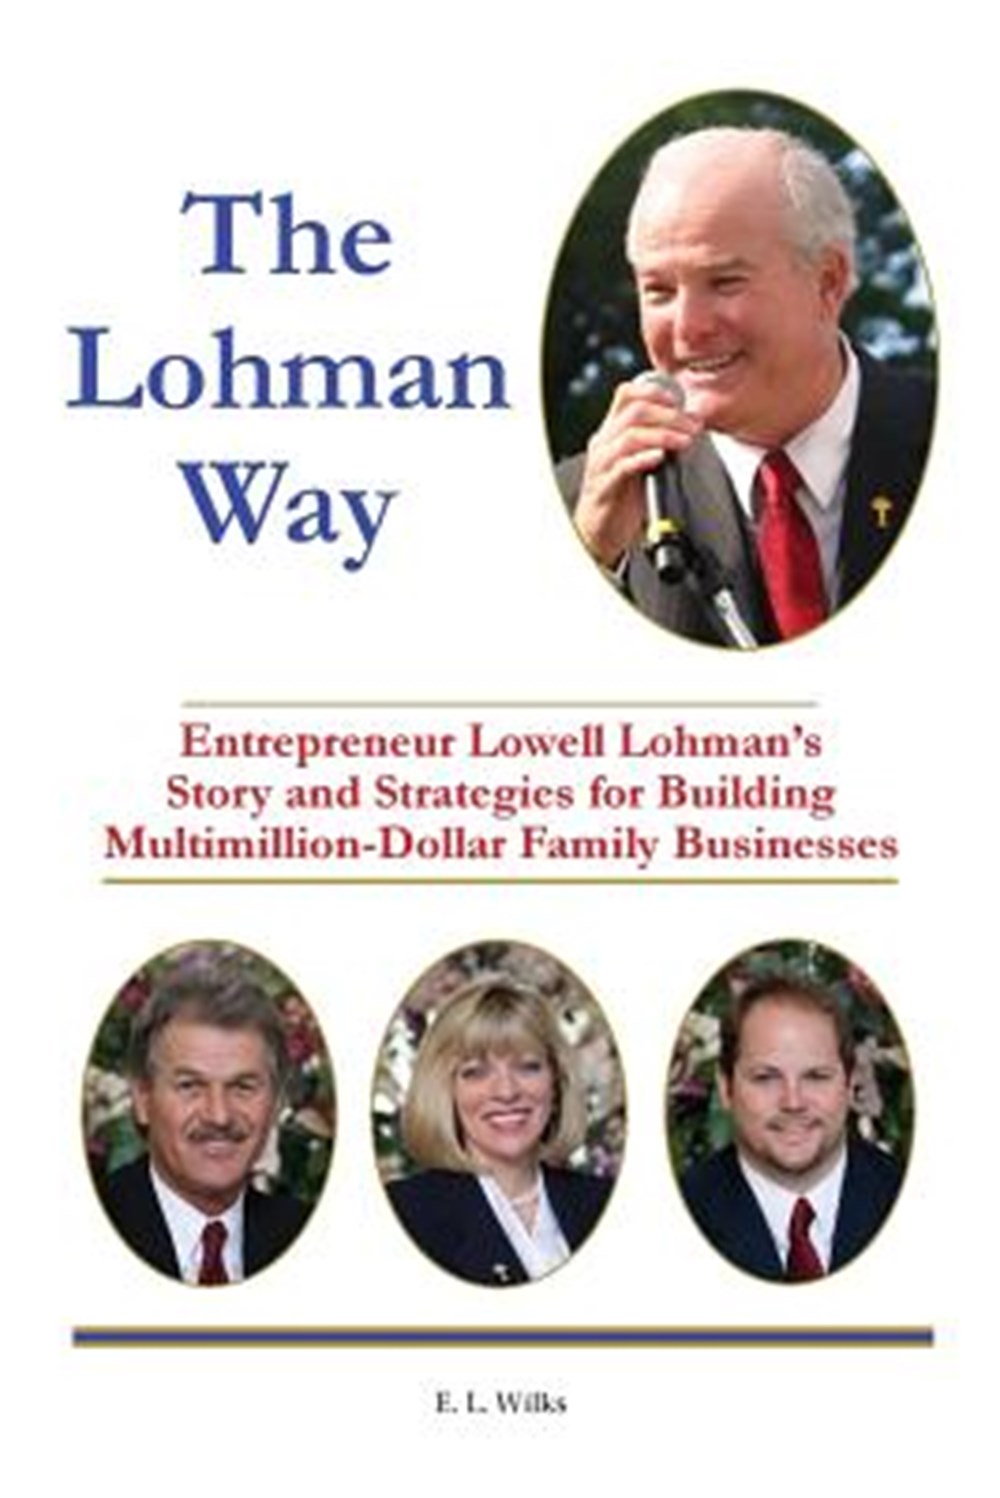 Lohman Way Entrepreneur Lowell Lohman's Story and Strategies for Building Multimillion-Dollar Family